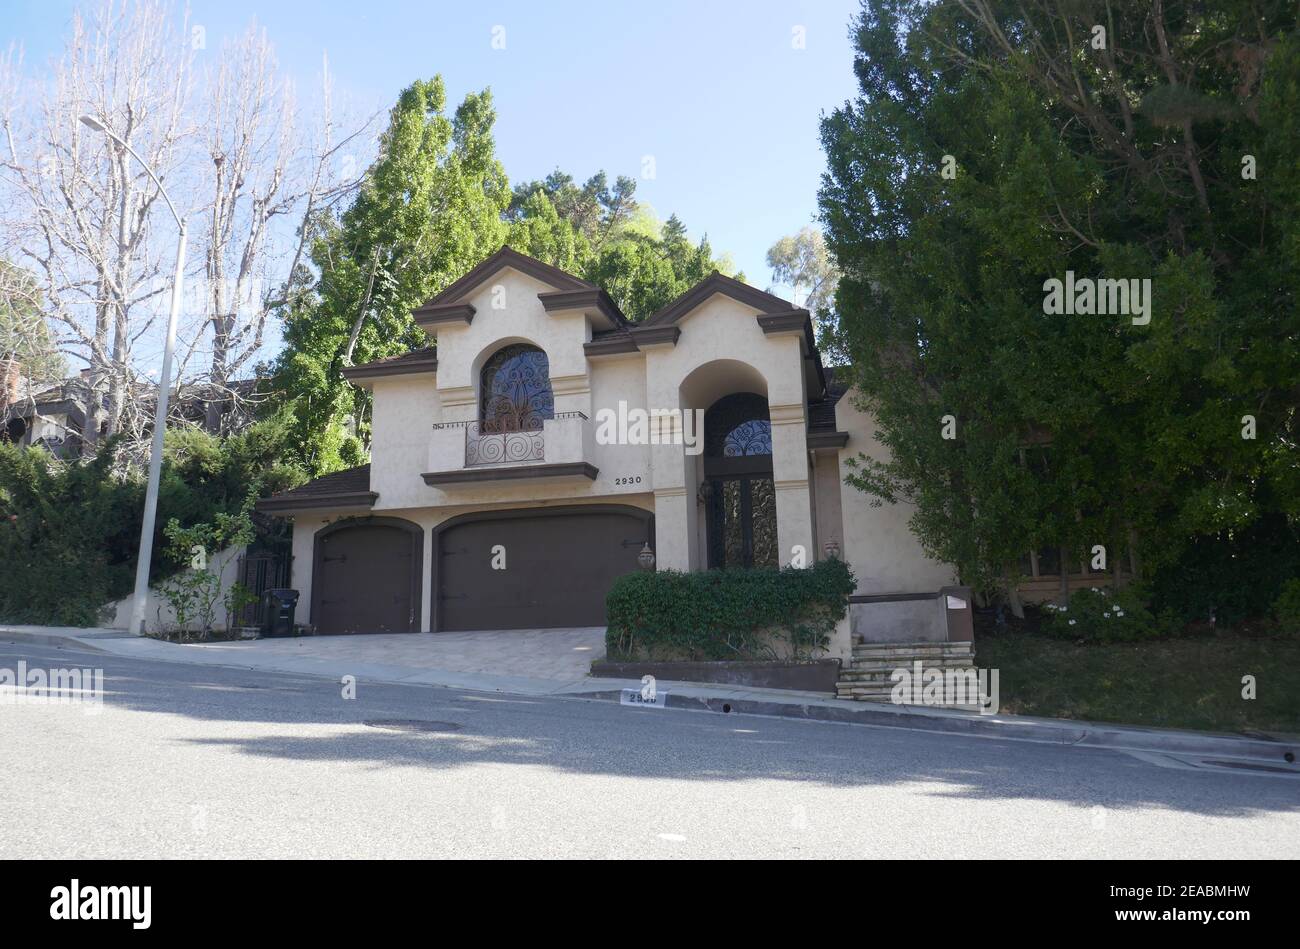 Beverly Hills, California, USA 8th February 2021 A general view of atmosphere of former home of actor Tom Poston at 2930 Deep Canyon Drive on February 8, 2021 in Beverly Hills, California, USA. Photo by Barry King/Alamy Stock Photo Stock Photo